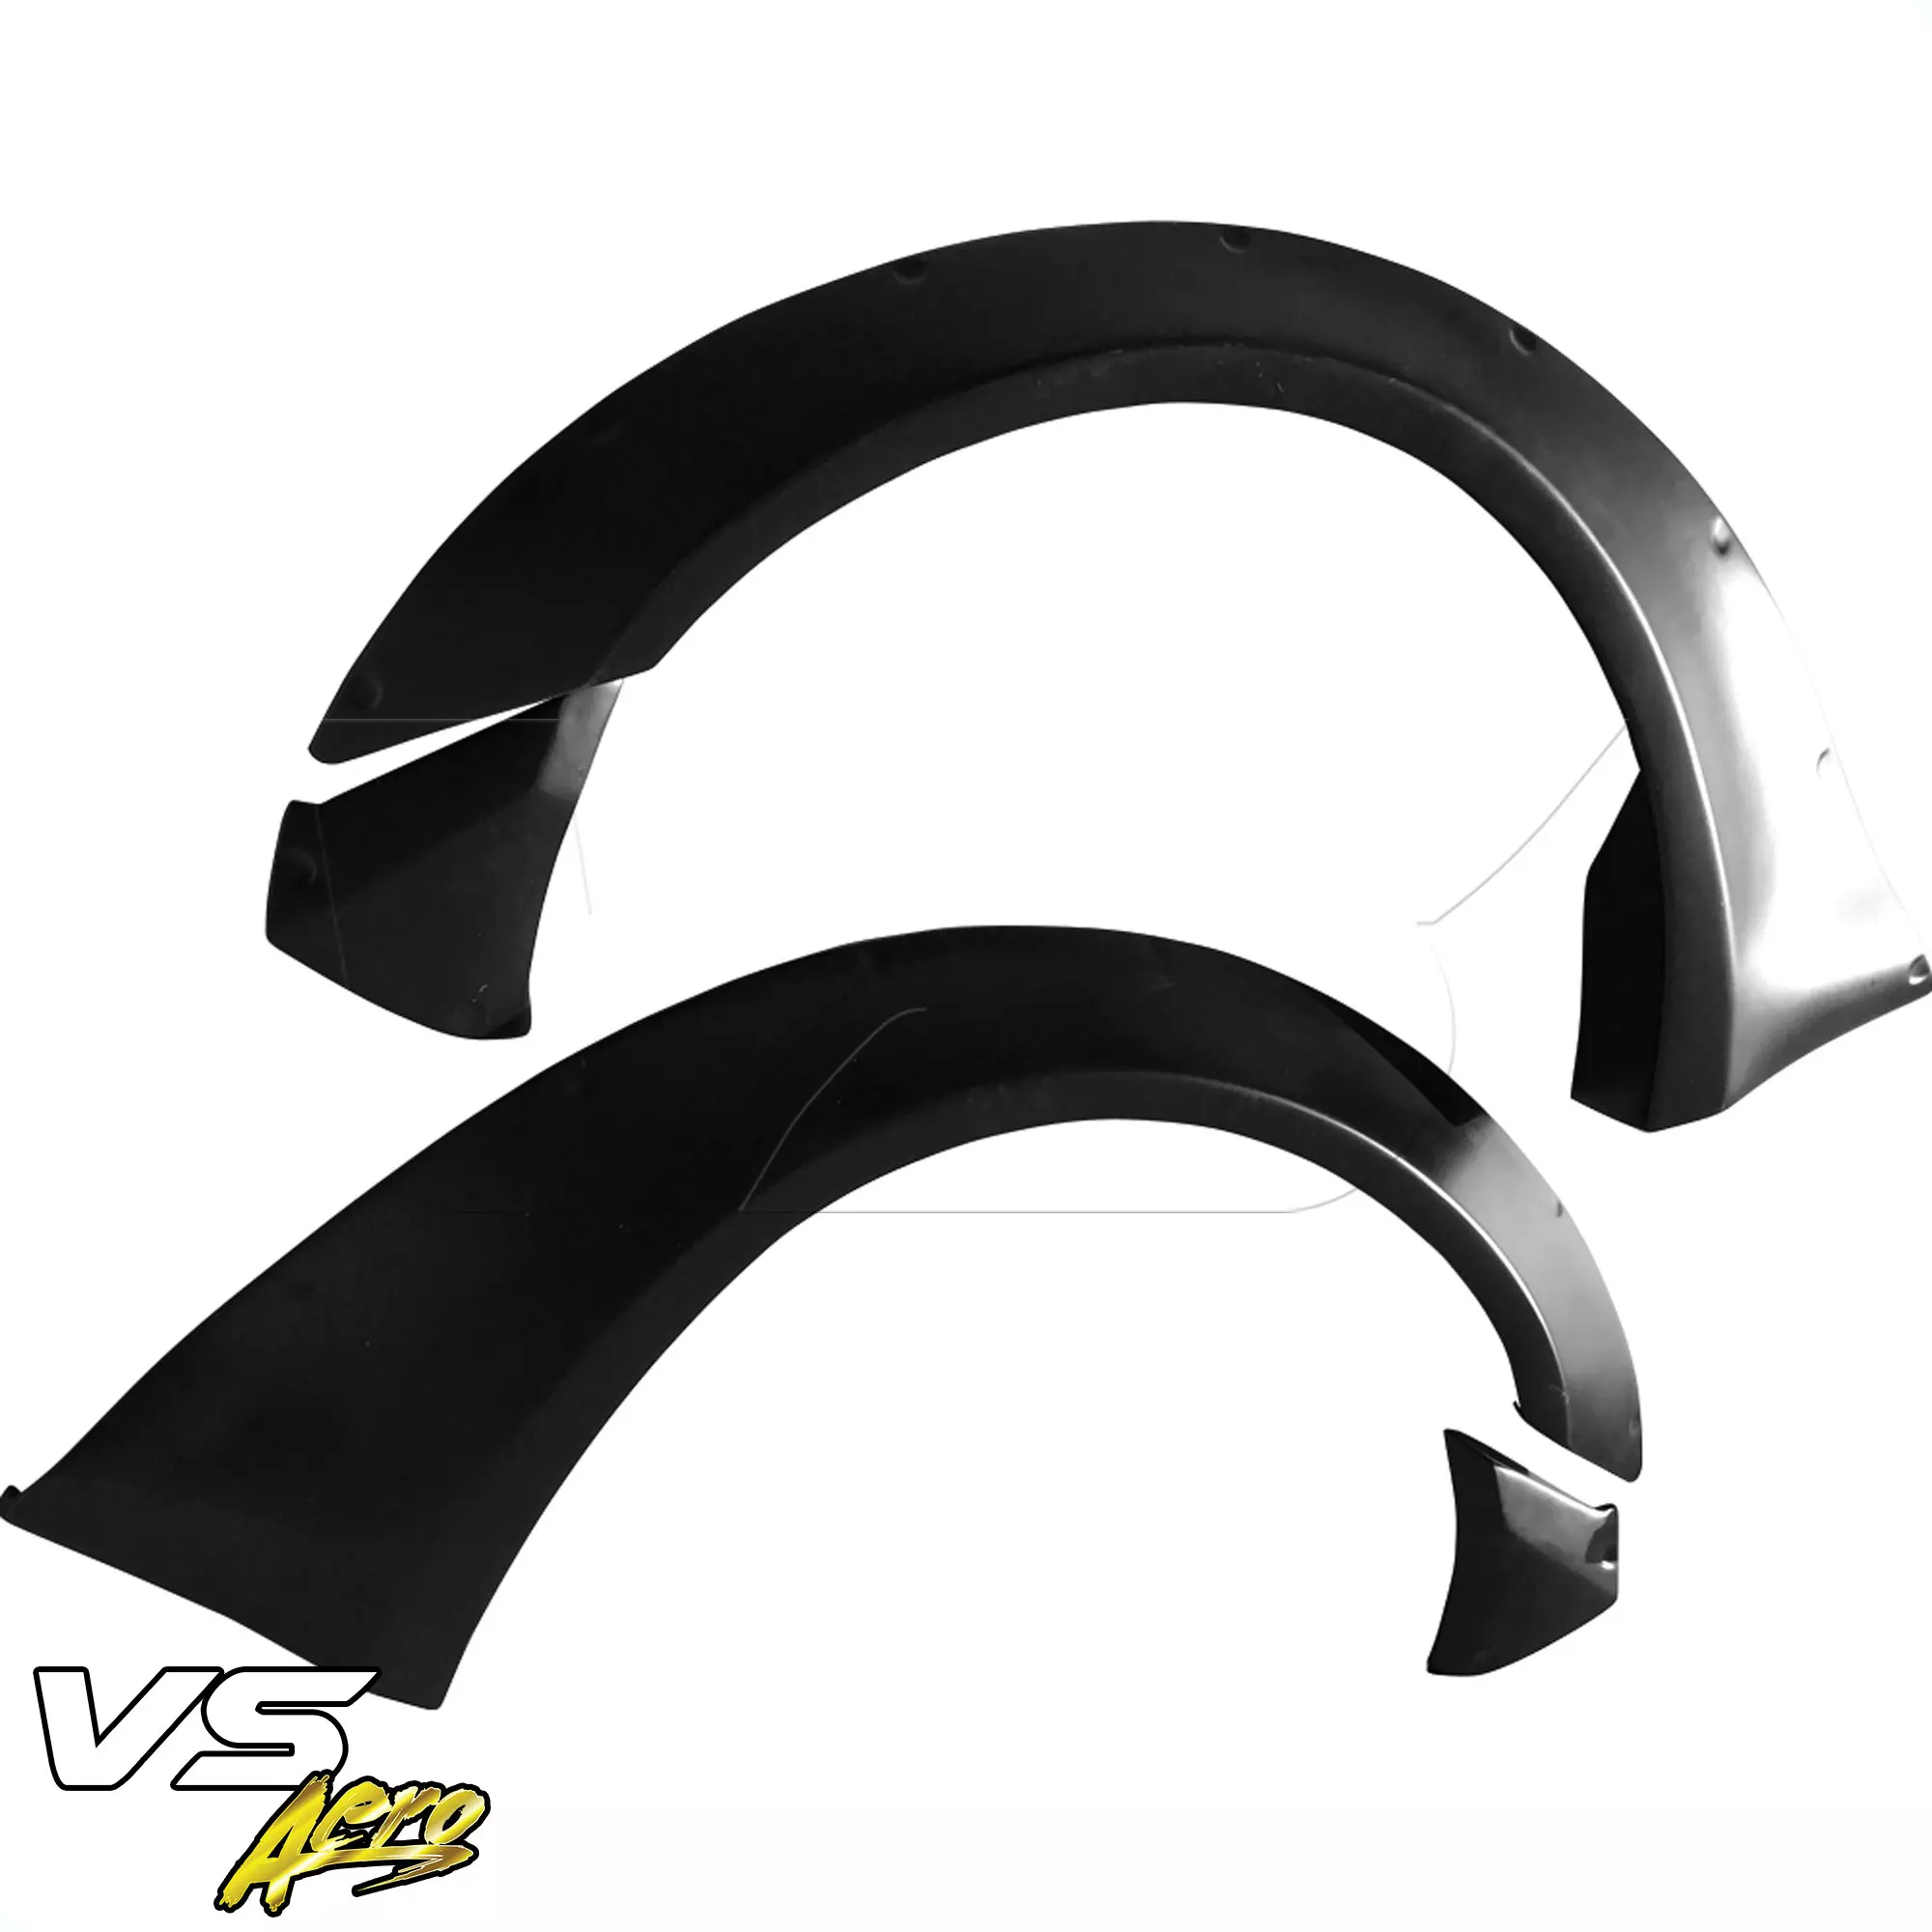 VSaero FRP LBPE Wide Body Fender Flares (front) 4pc > Infiniti G37 Coupe 2008-2015 > 2dr Coupe - Image 17